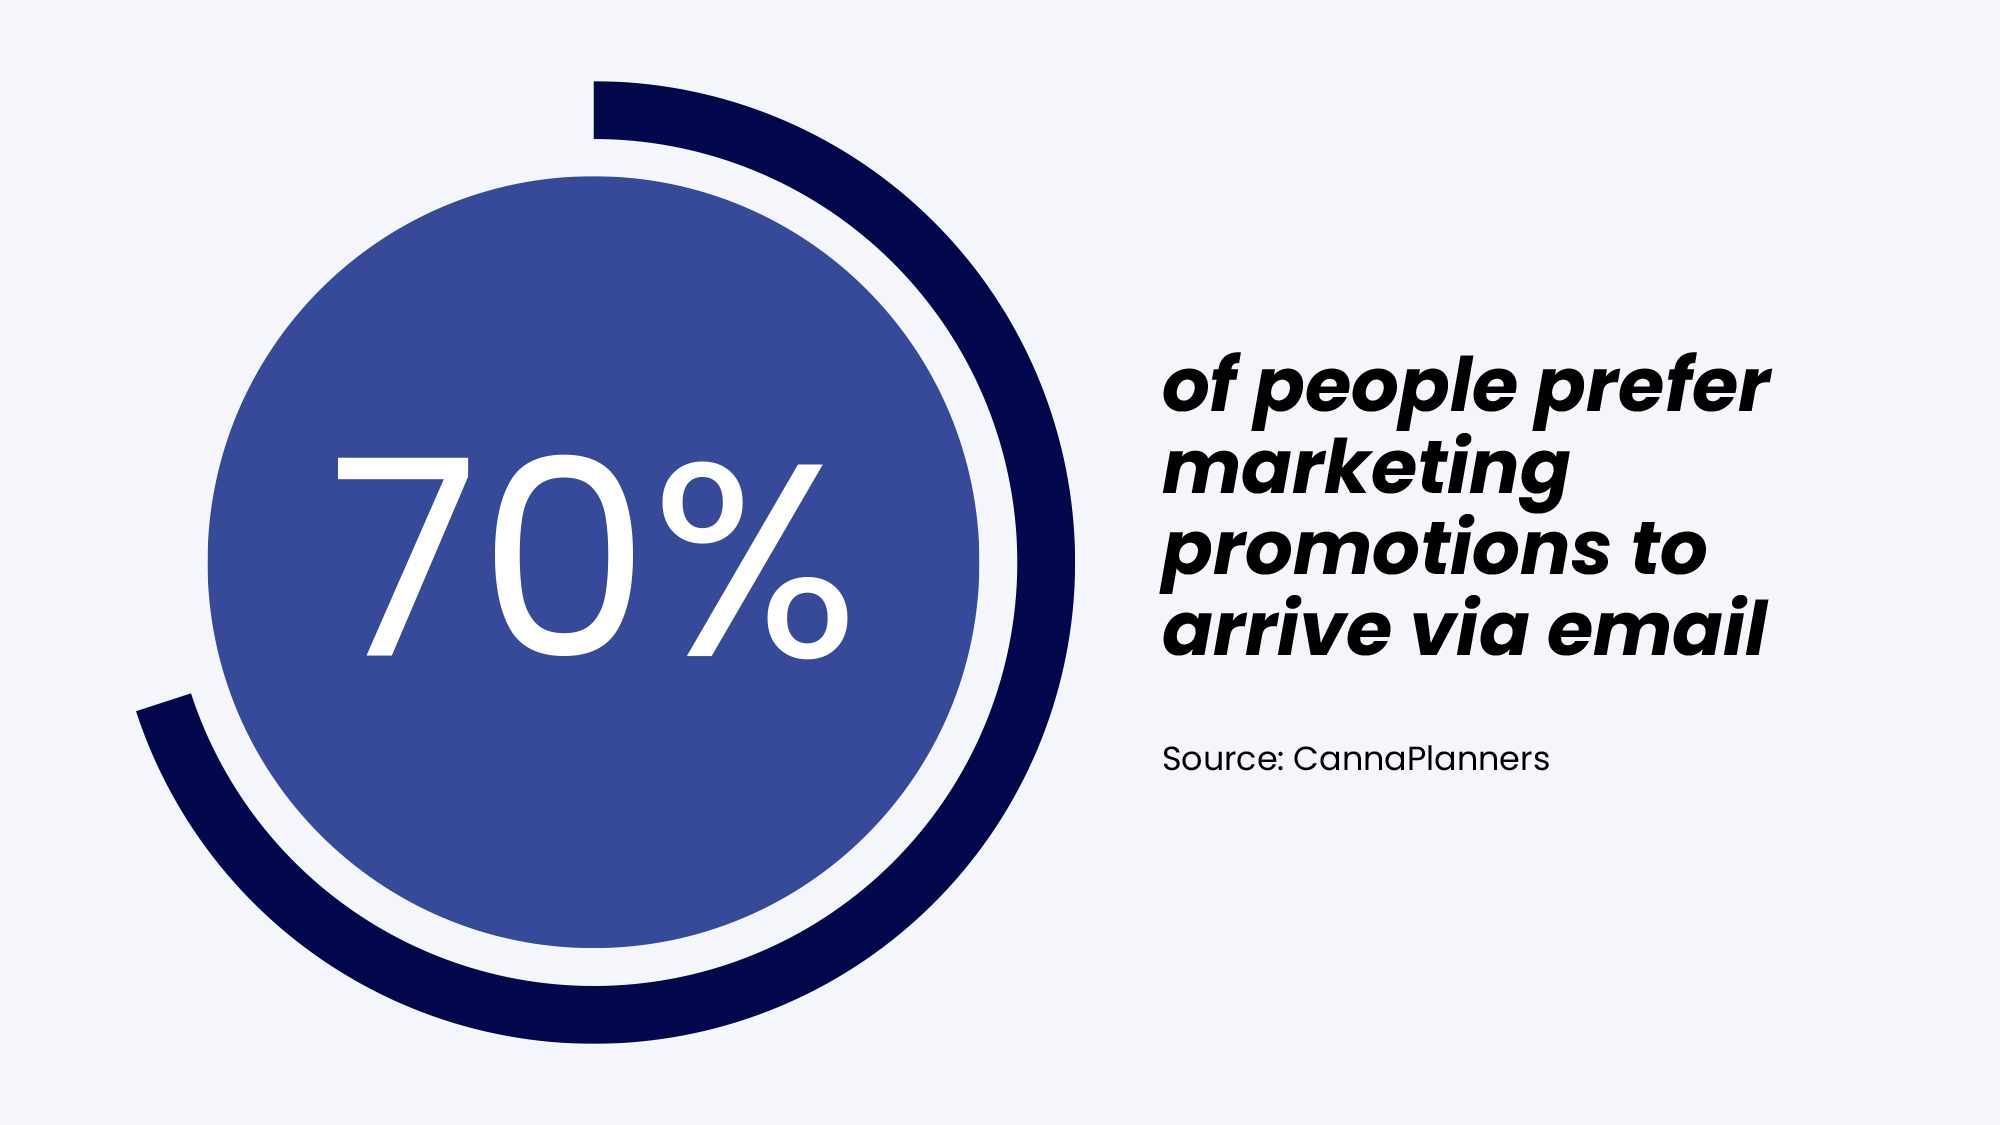 70% of people prefer marketing promotions to arrive via email